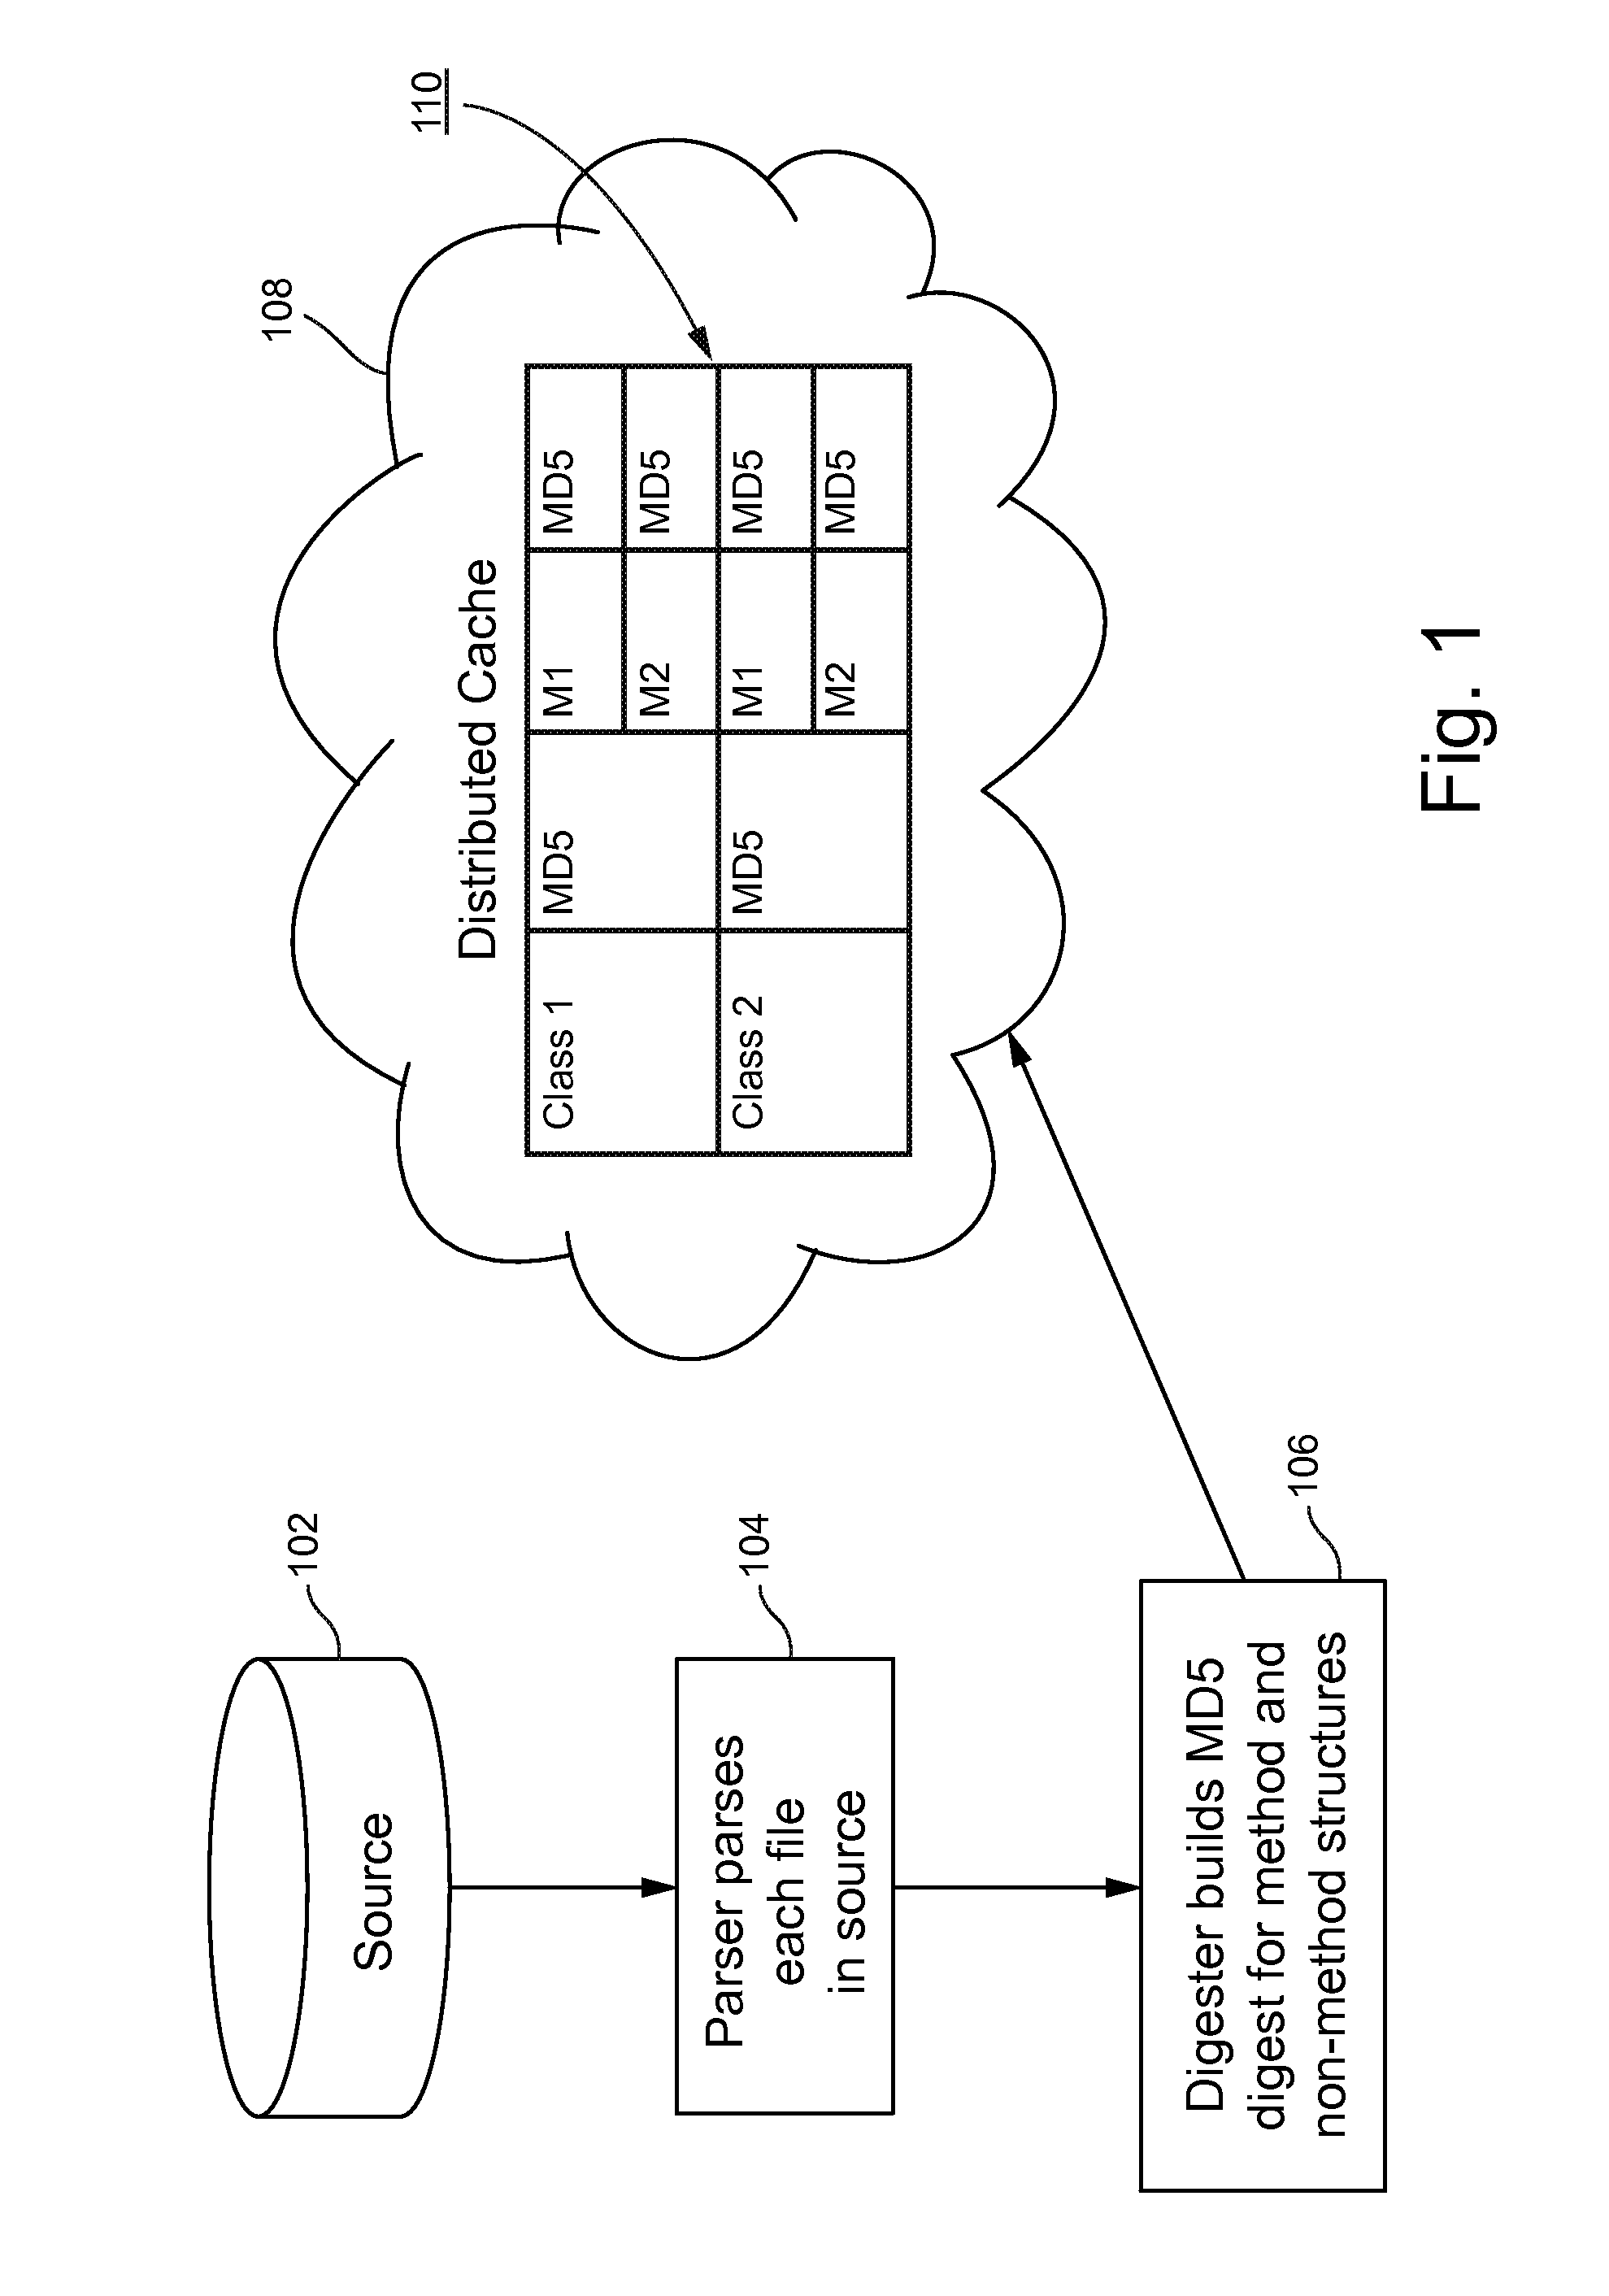 Systems and/or methods for executing appropriate tests based on code modifications using live, distributed, real-time cache and feedback loop